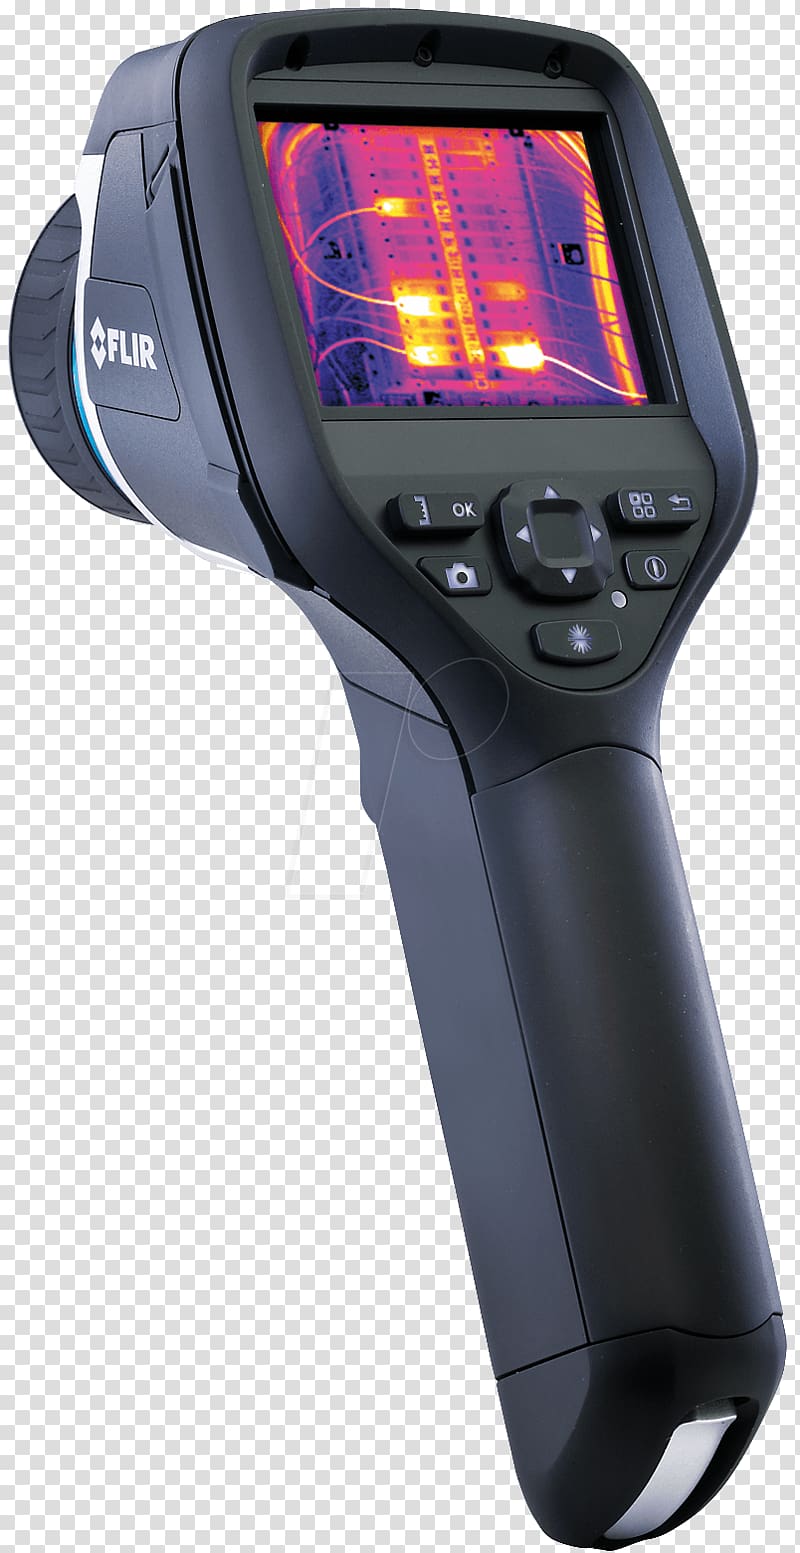 Thermographic camera Thermography Forward-looking infrared FLIR Systems Thermal imaging camera, Camera transparent background PNG clipart